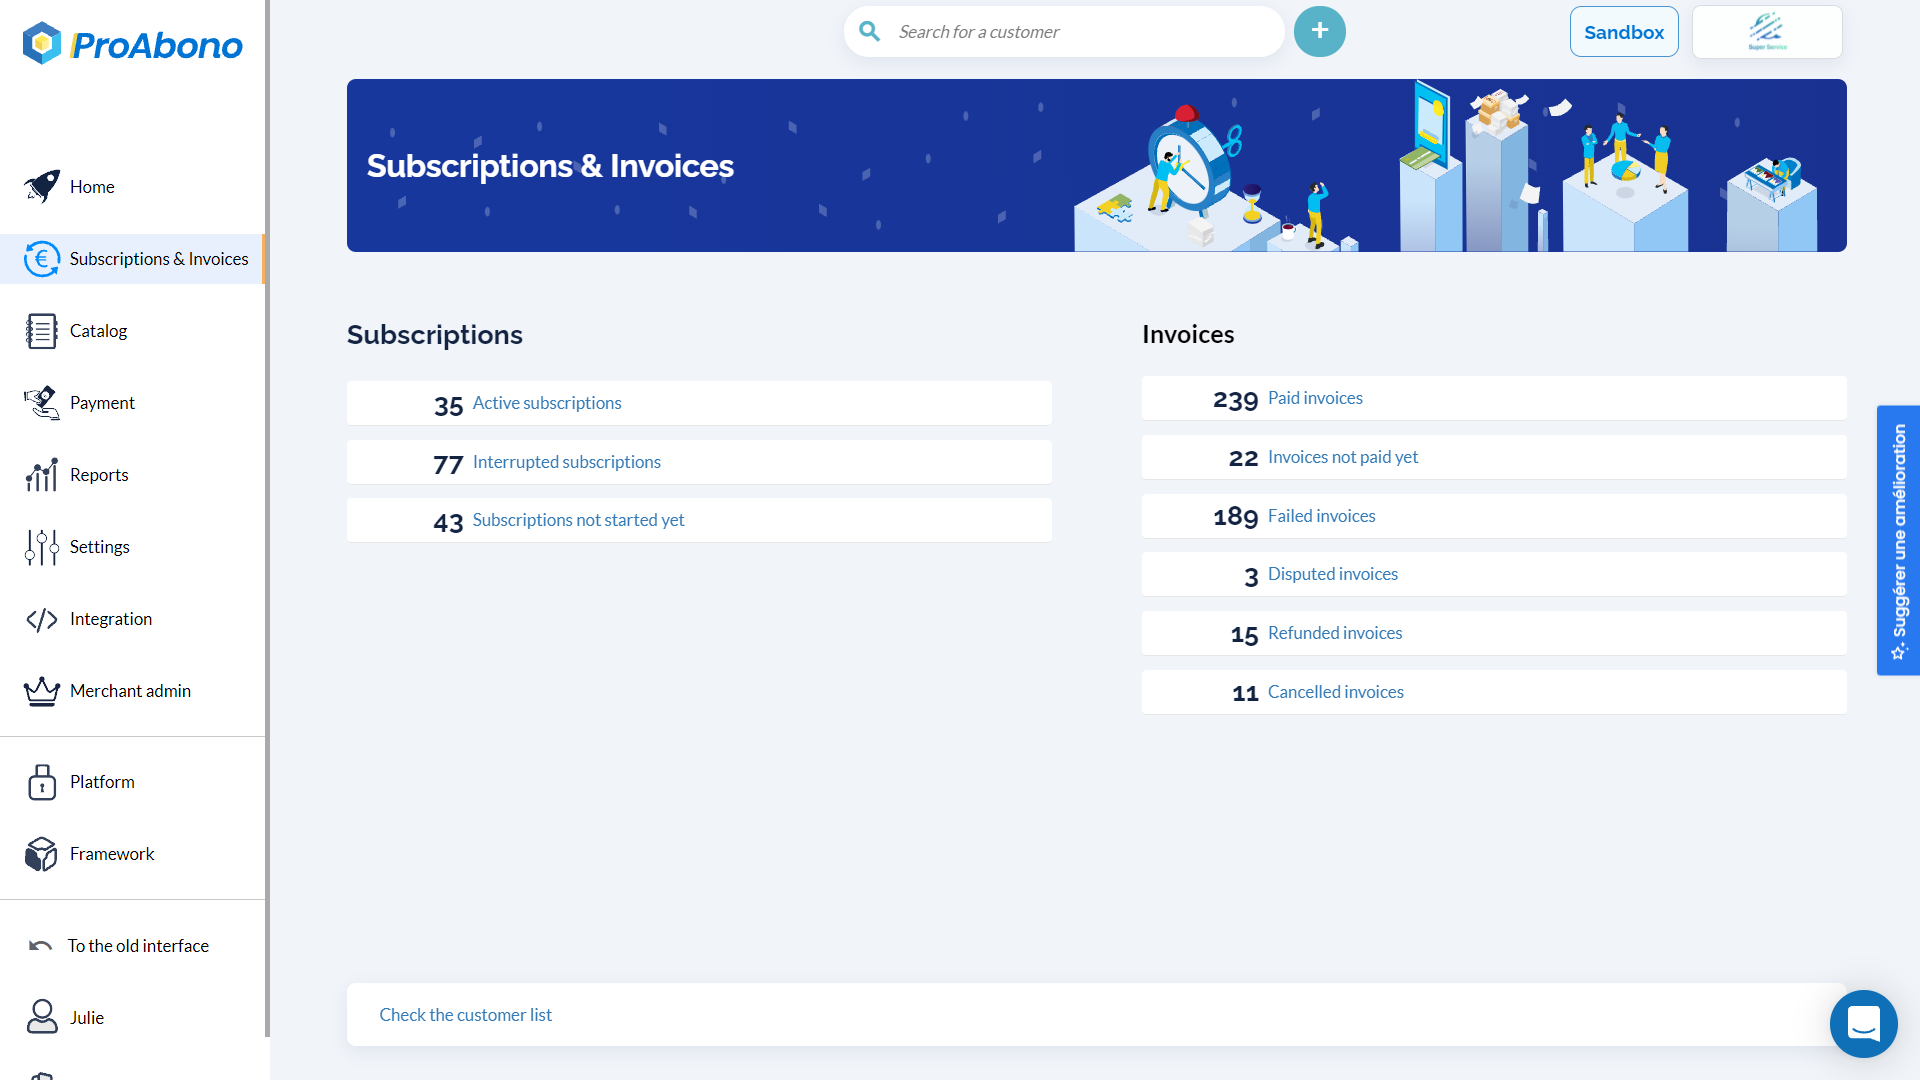 ProAbono - Find all your subscriptions, customers and invoices to manage your SaaS business